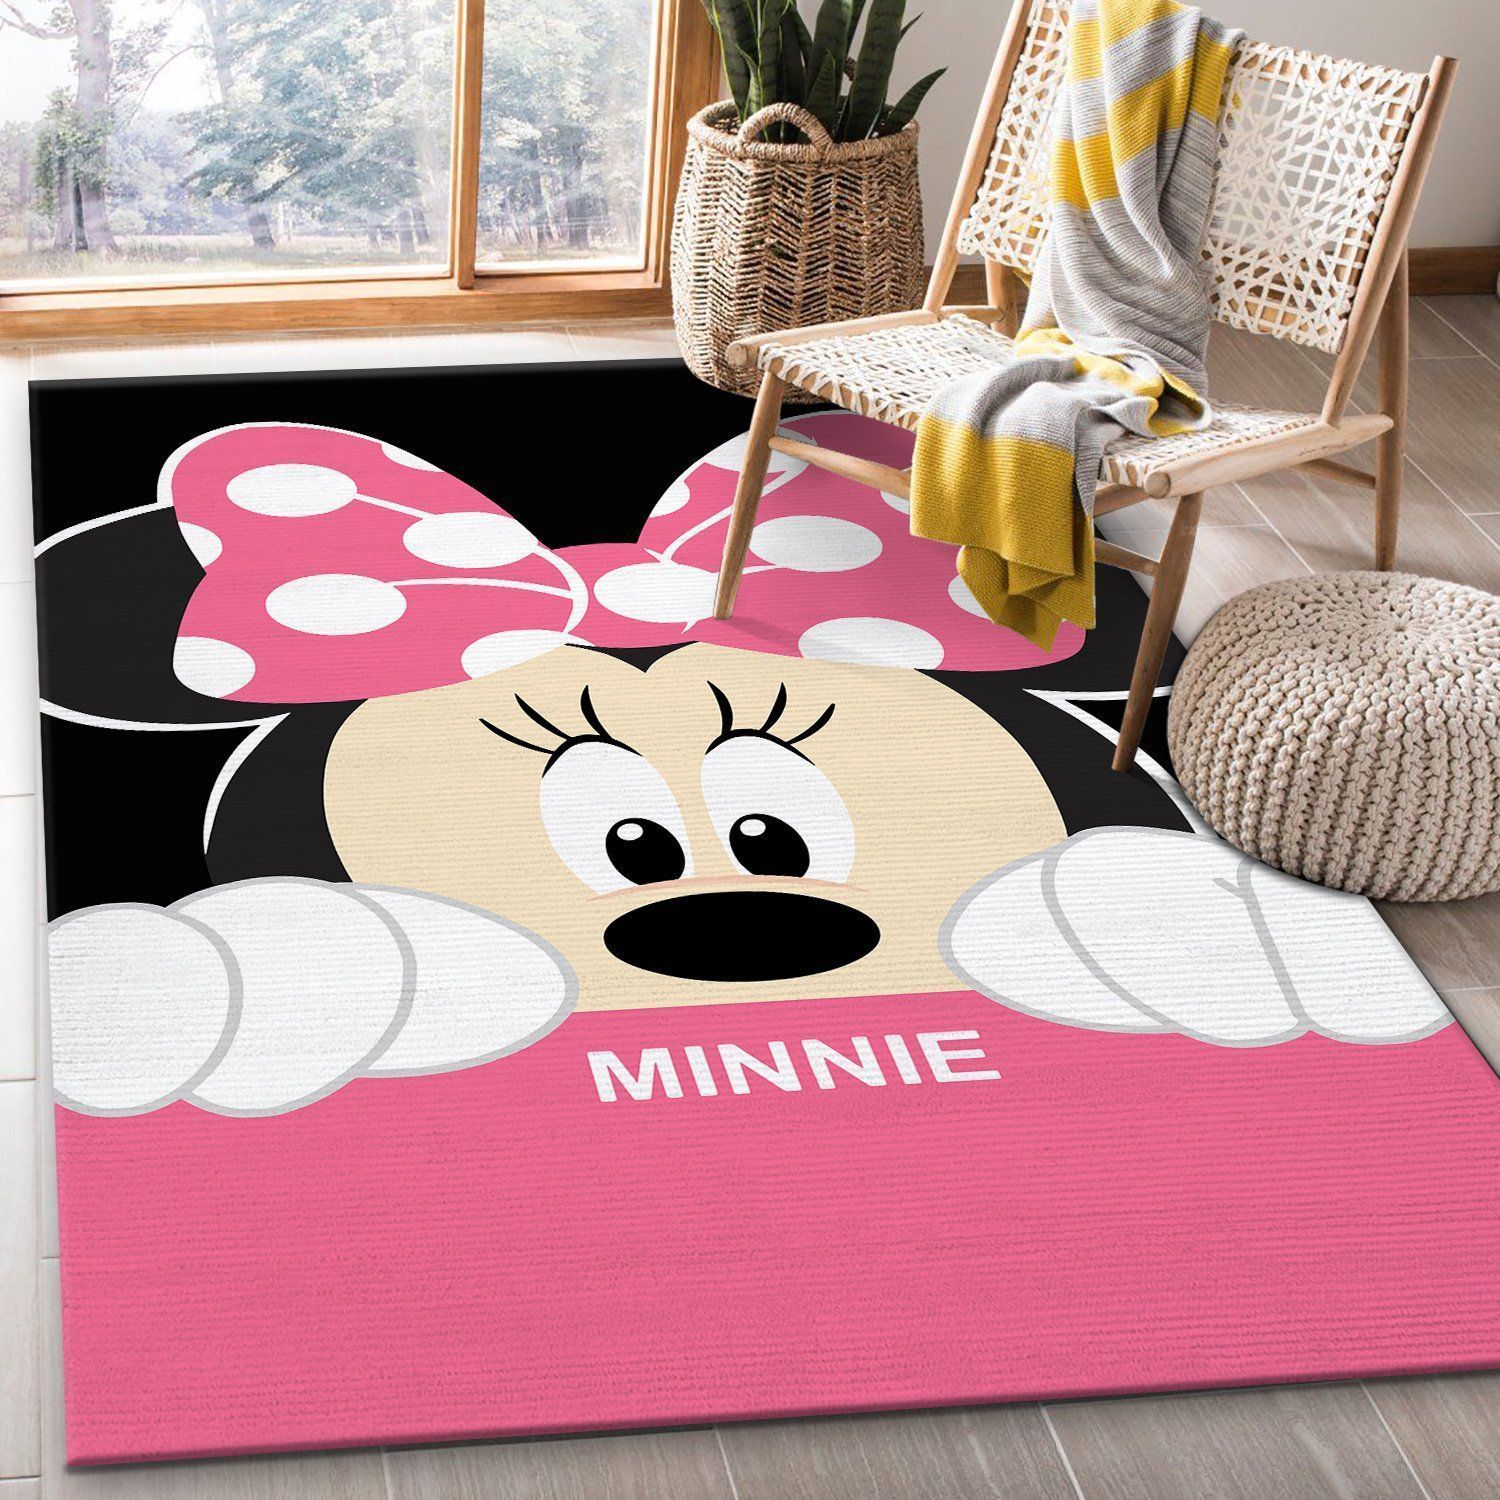 Minnie Mouse Area Rugs Disney Movies Living Room Carpet Local Brands Floor Decor The US Decor - Indoor Outdoor Rugs